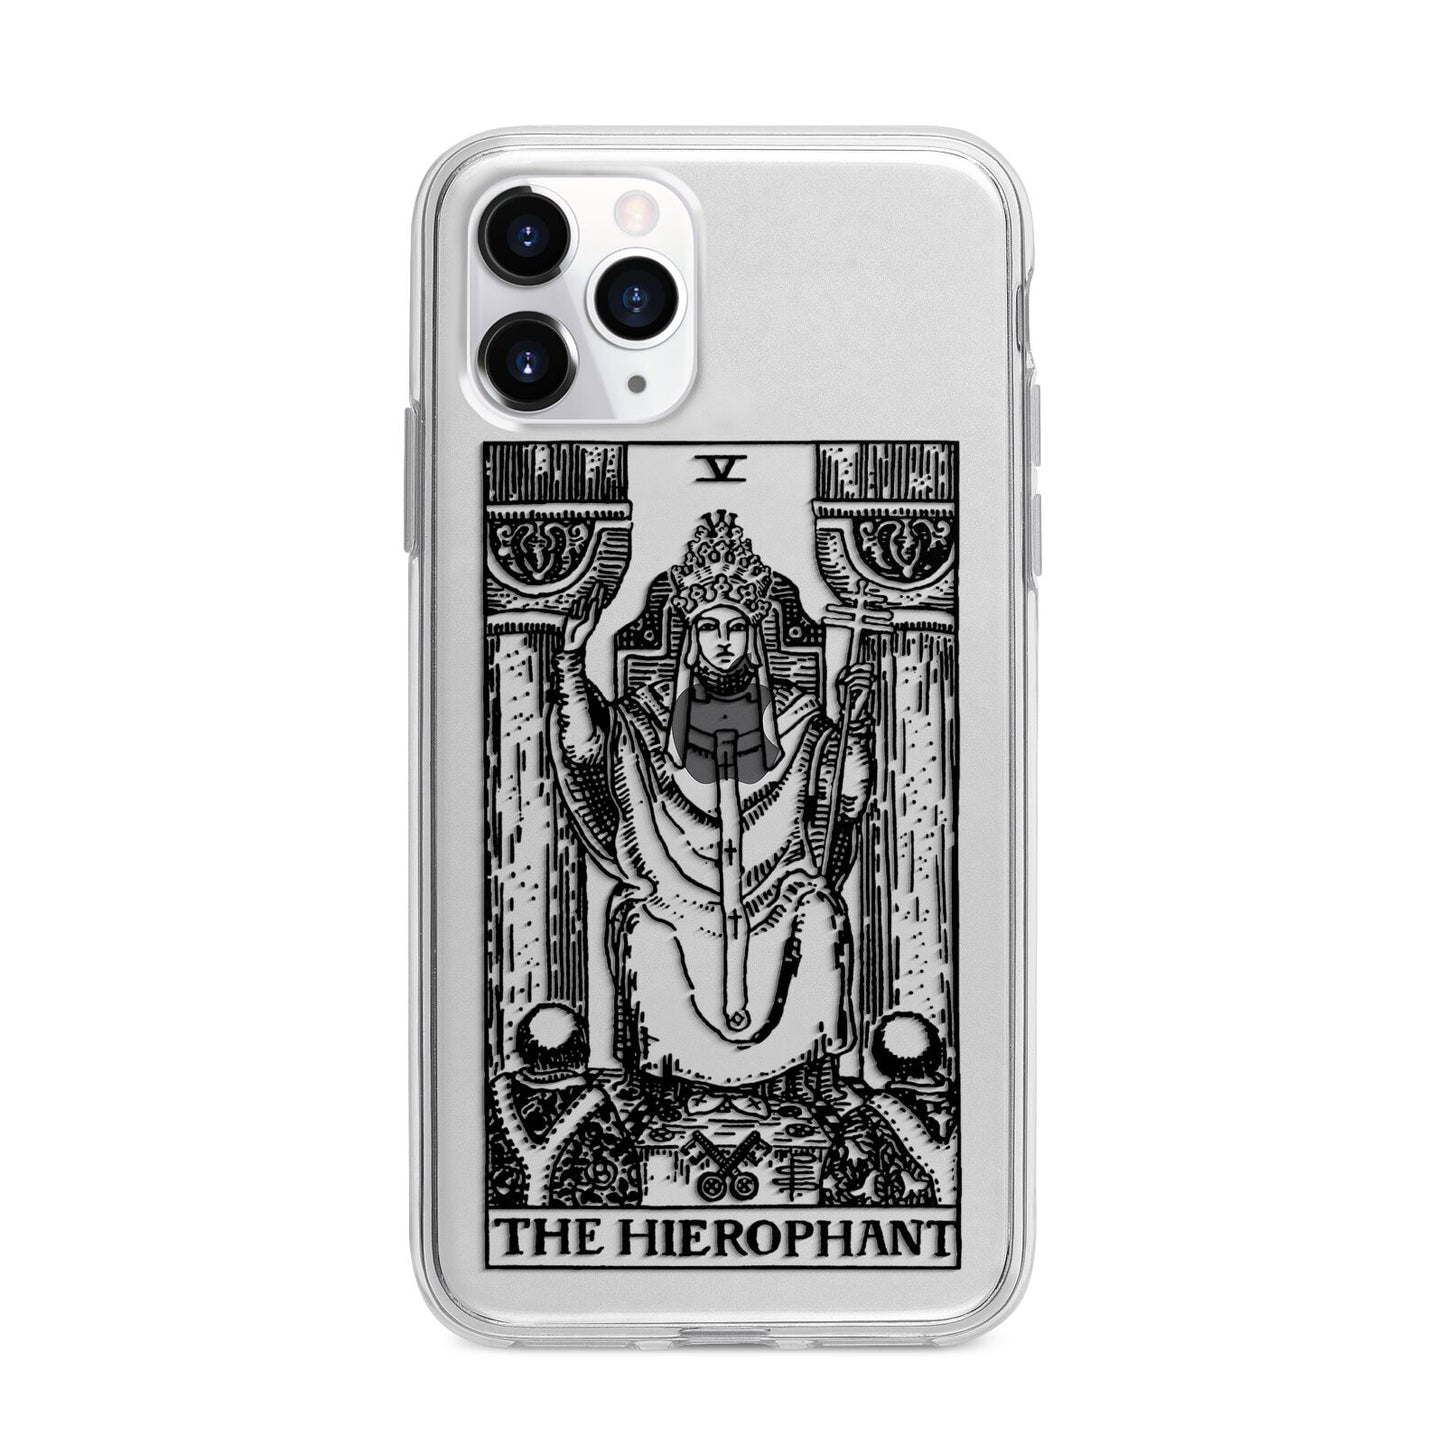 The Hierophant Monochrome Tarot Card Apple iPhone 11 Pro Max in Silver with Bumper Case